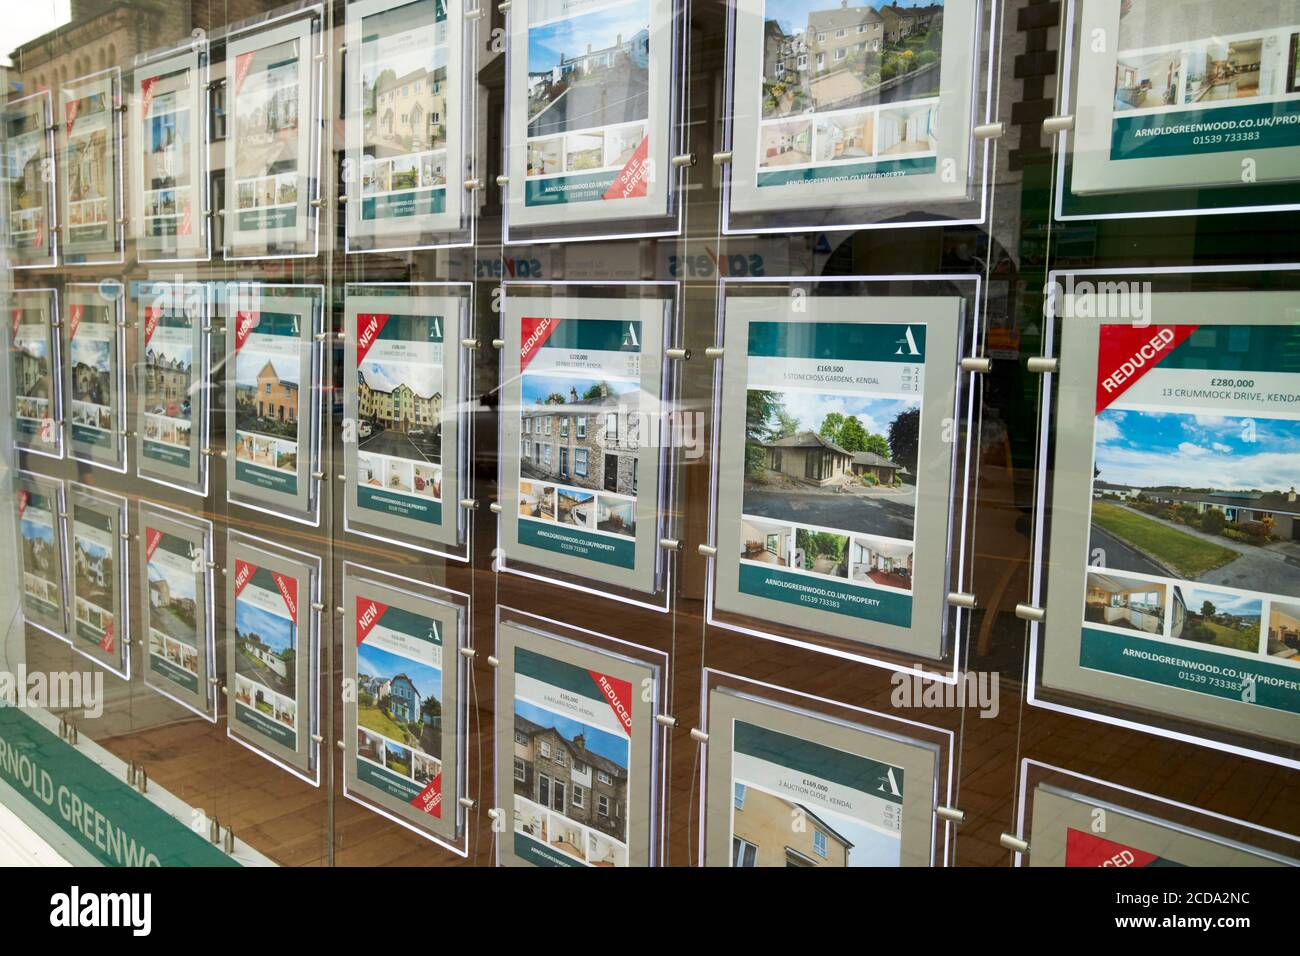 properties for sale in the window of an estate agency in Kendal cumbria england uk Stock Photo